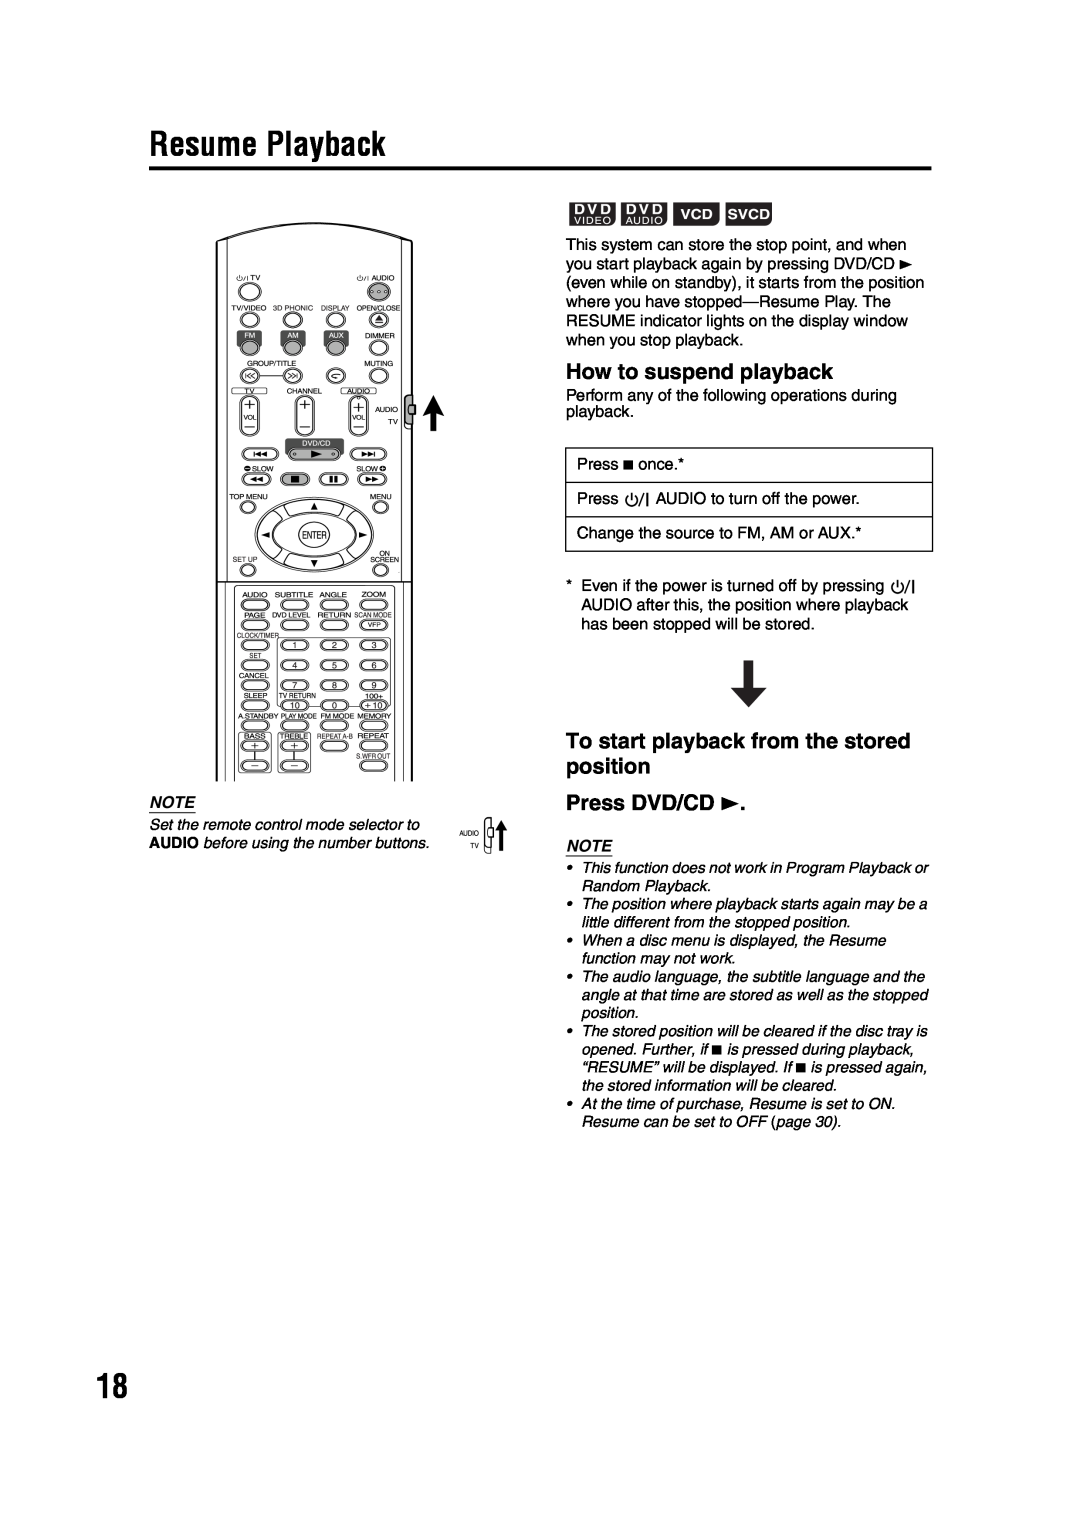 JVC GVT0142-001A manual Resume Playback, How to suspend playback, To start playback from the stored position, Press DVD/CD 